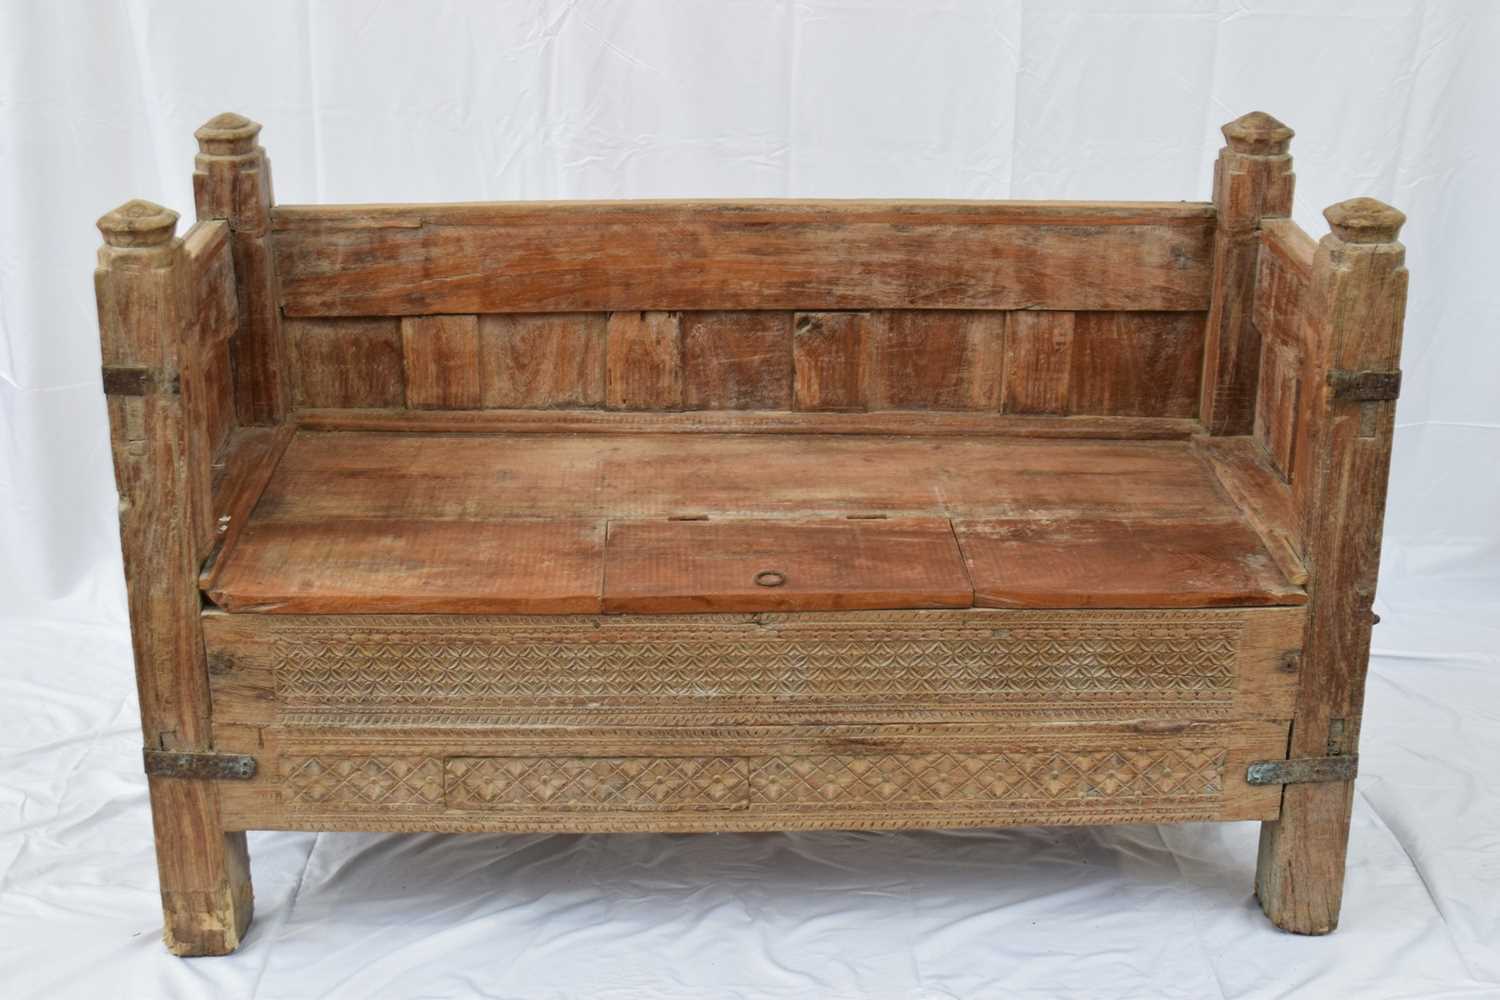 Indian hardwood settle with storage base and panelled sides, 145cm wide